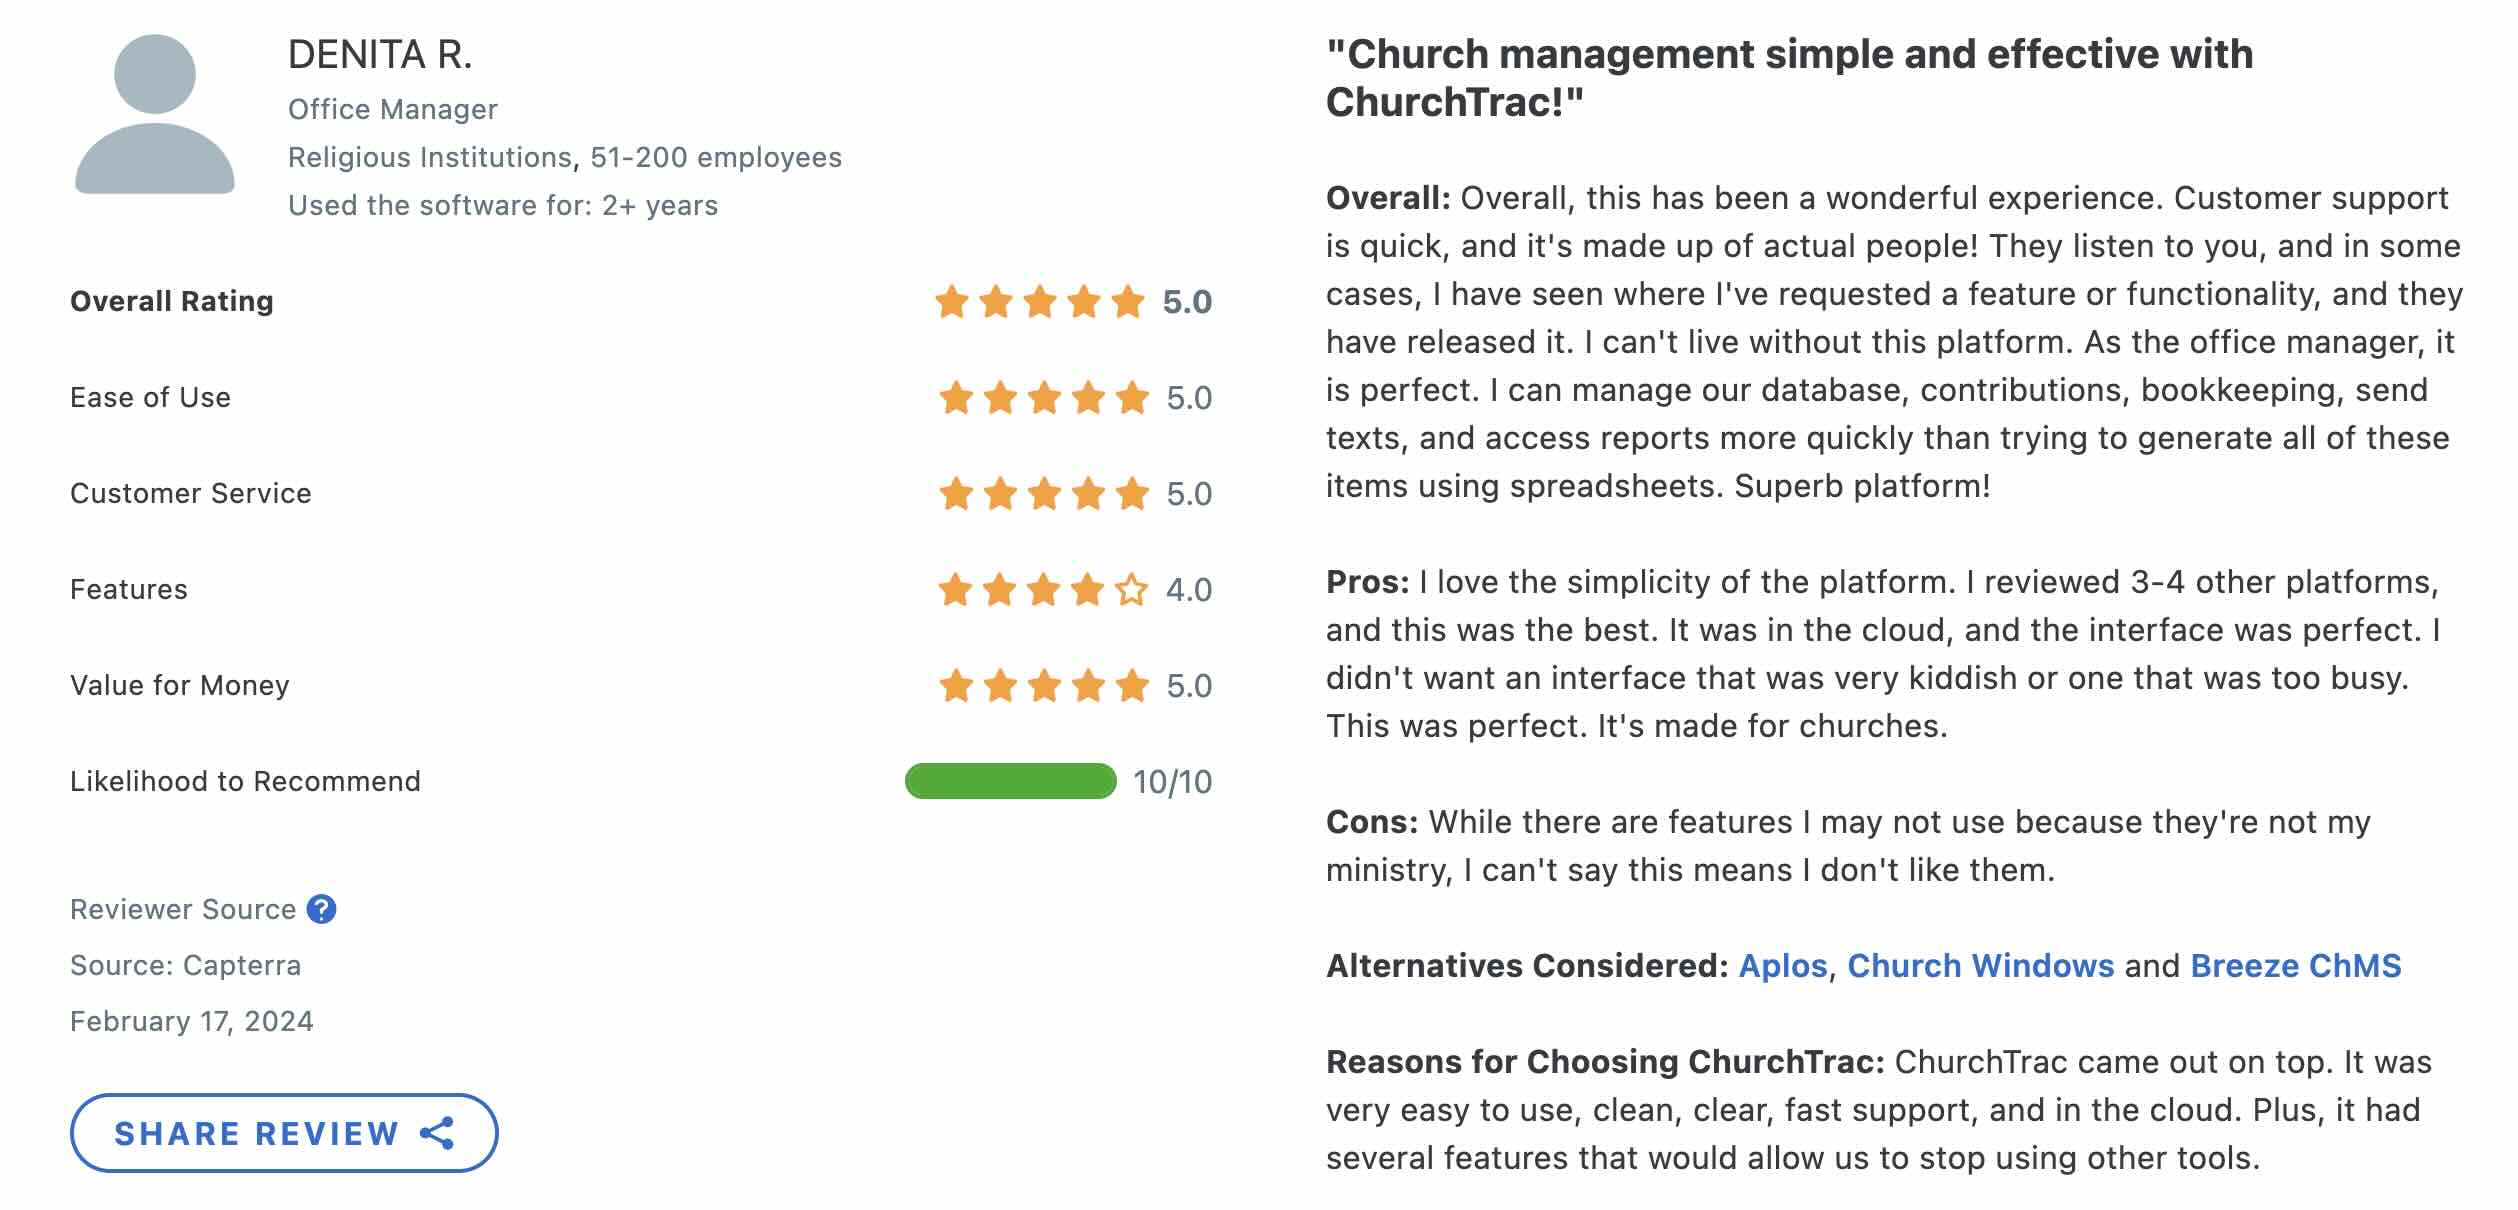 ChurchTrac is the Best Church Software for Small Churches